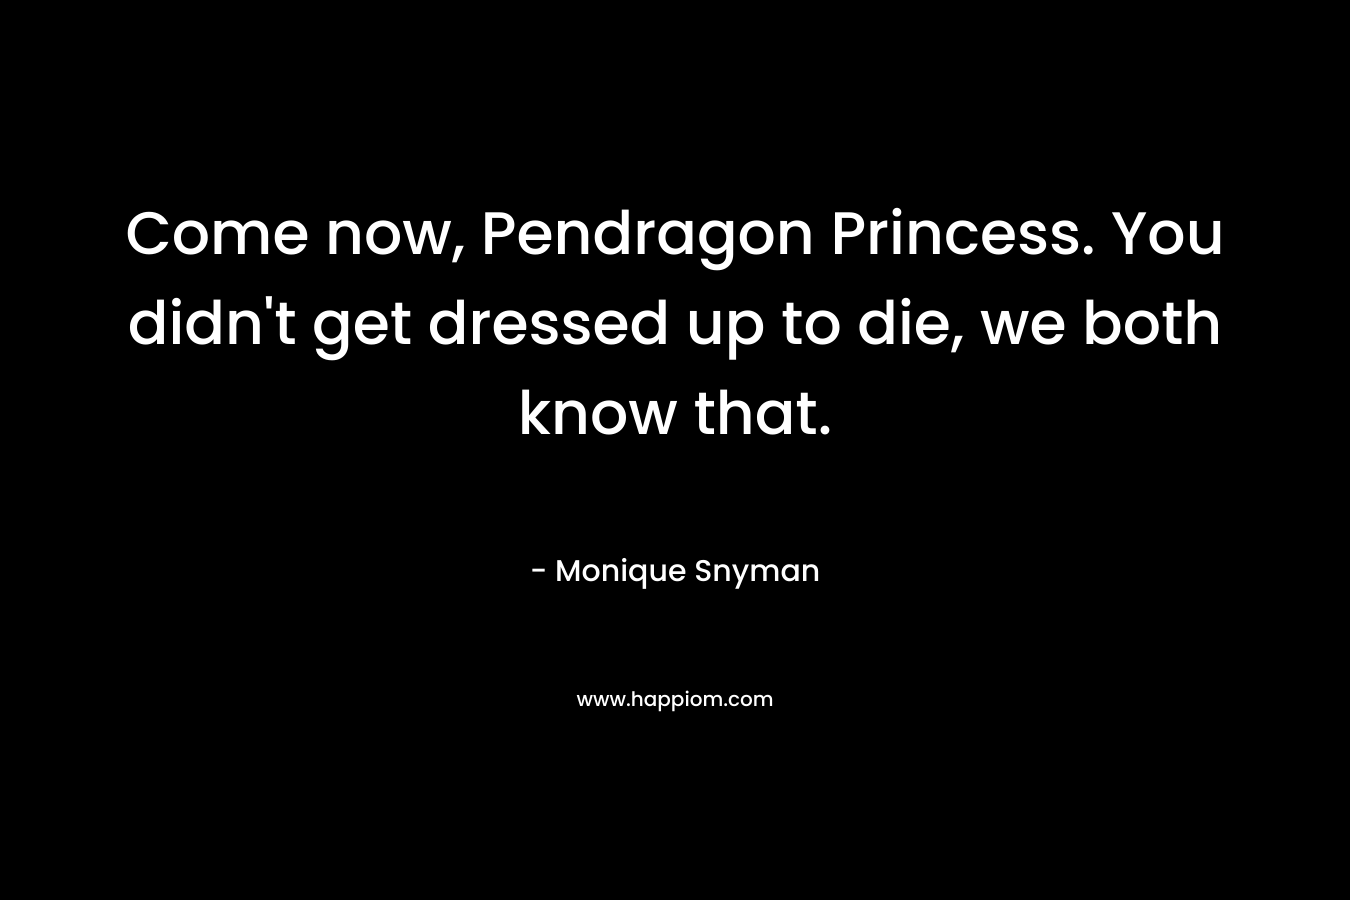 Come now, Pendragon Princess. You didn’t get dressed up to die, we both know that. – Monique Snyman